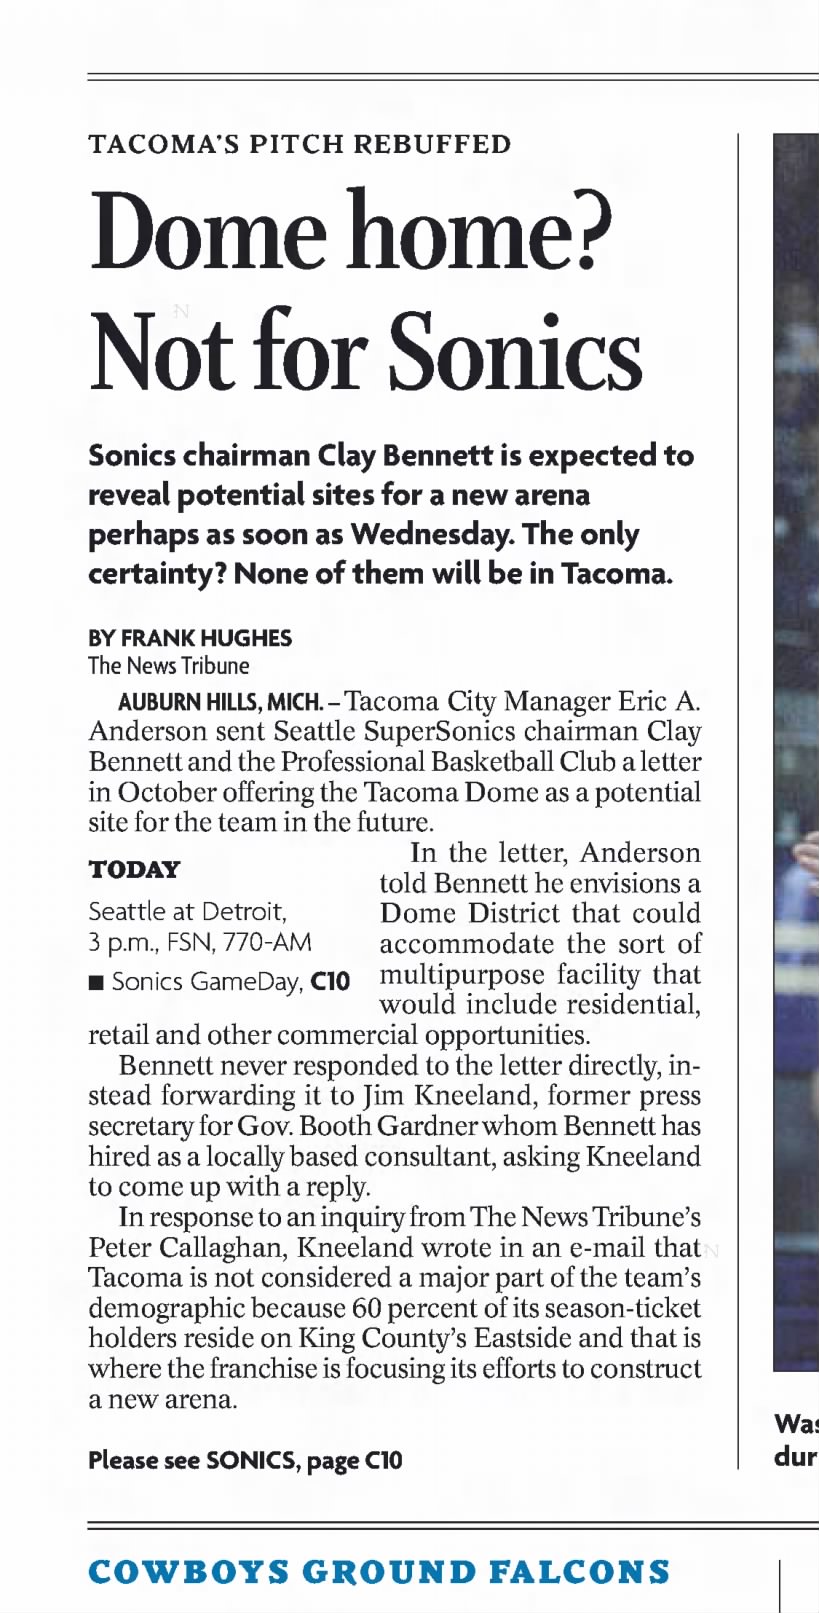 Dome home? Not for Sonics